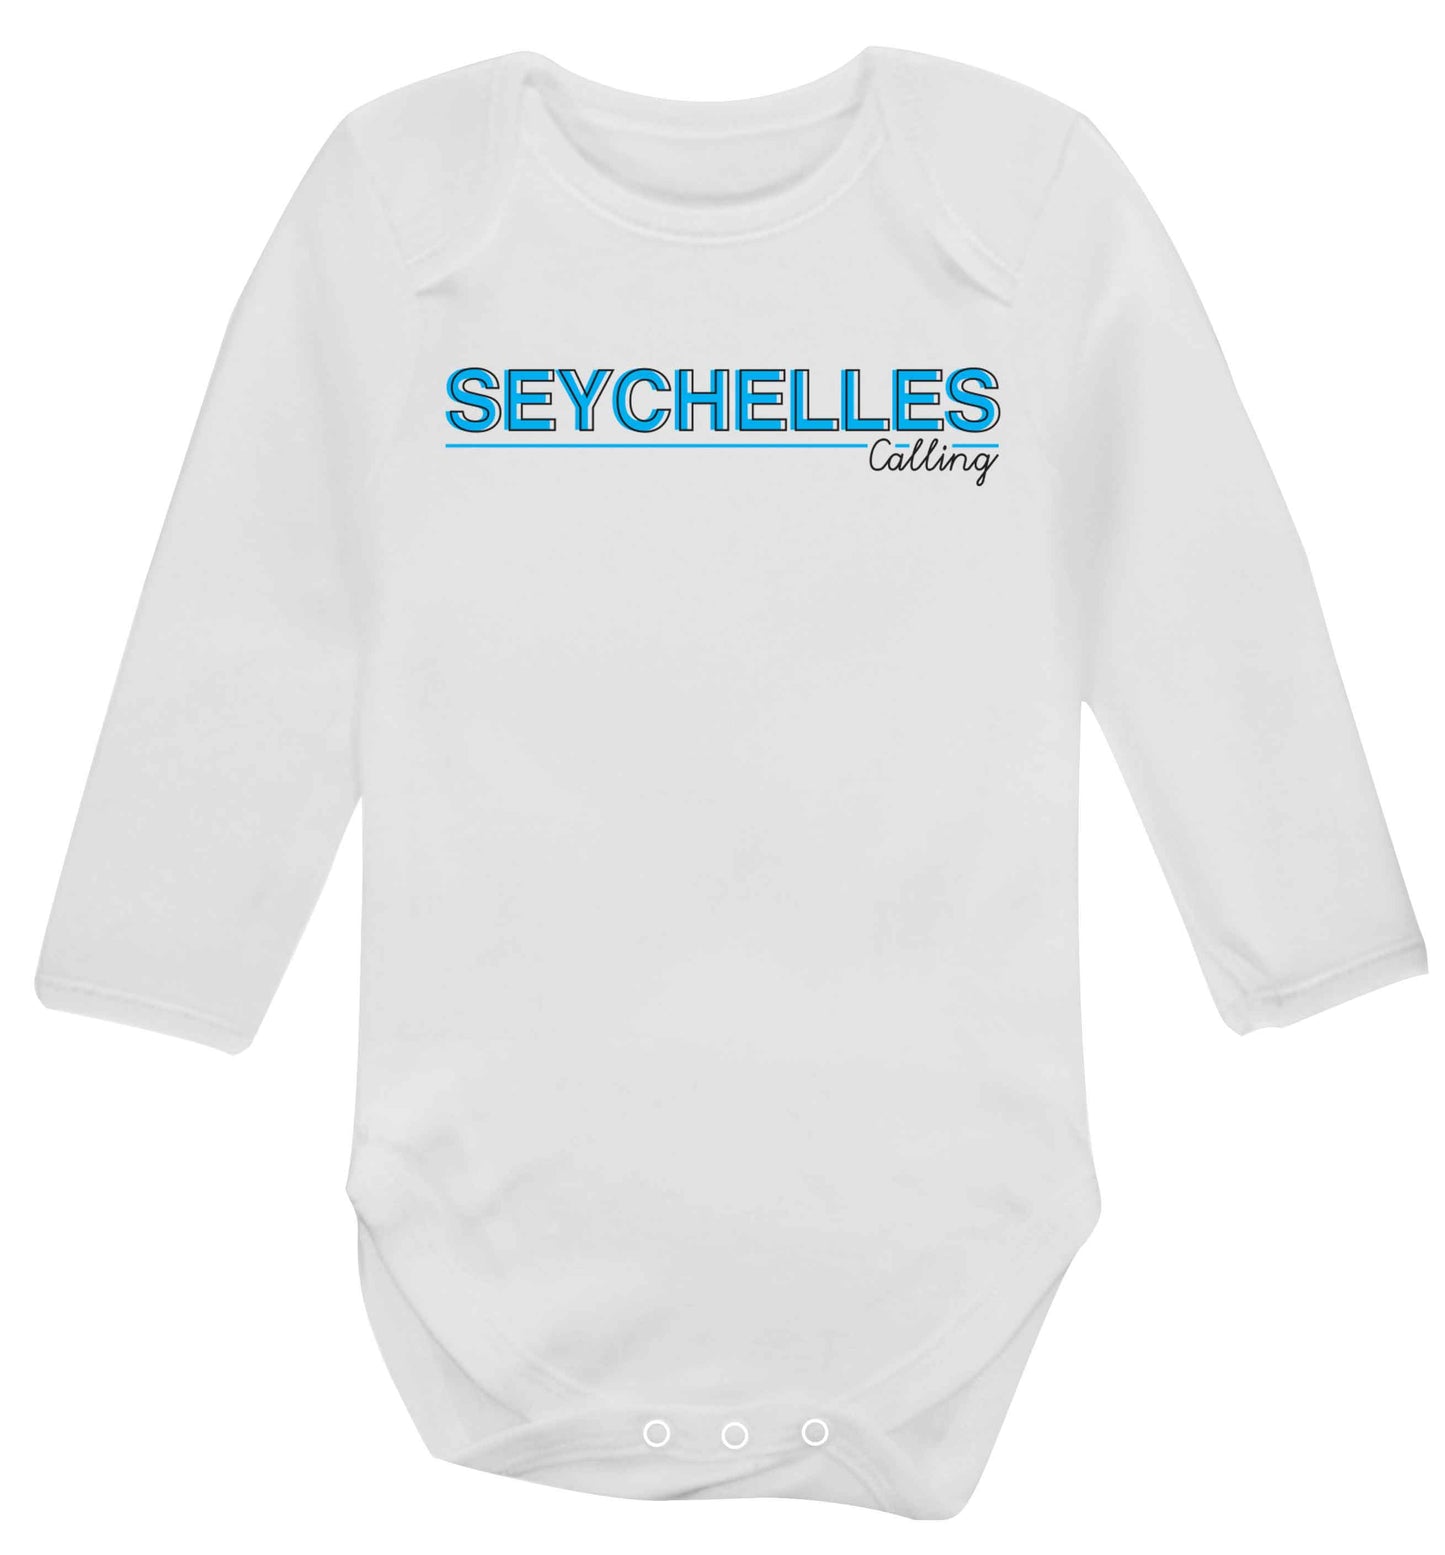 Seychelles calling Baby Vest long sleeved white 6-12 months